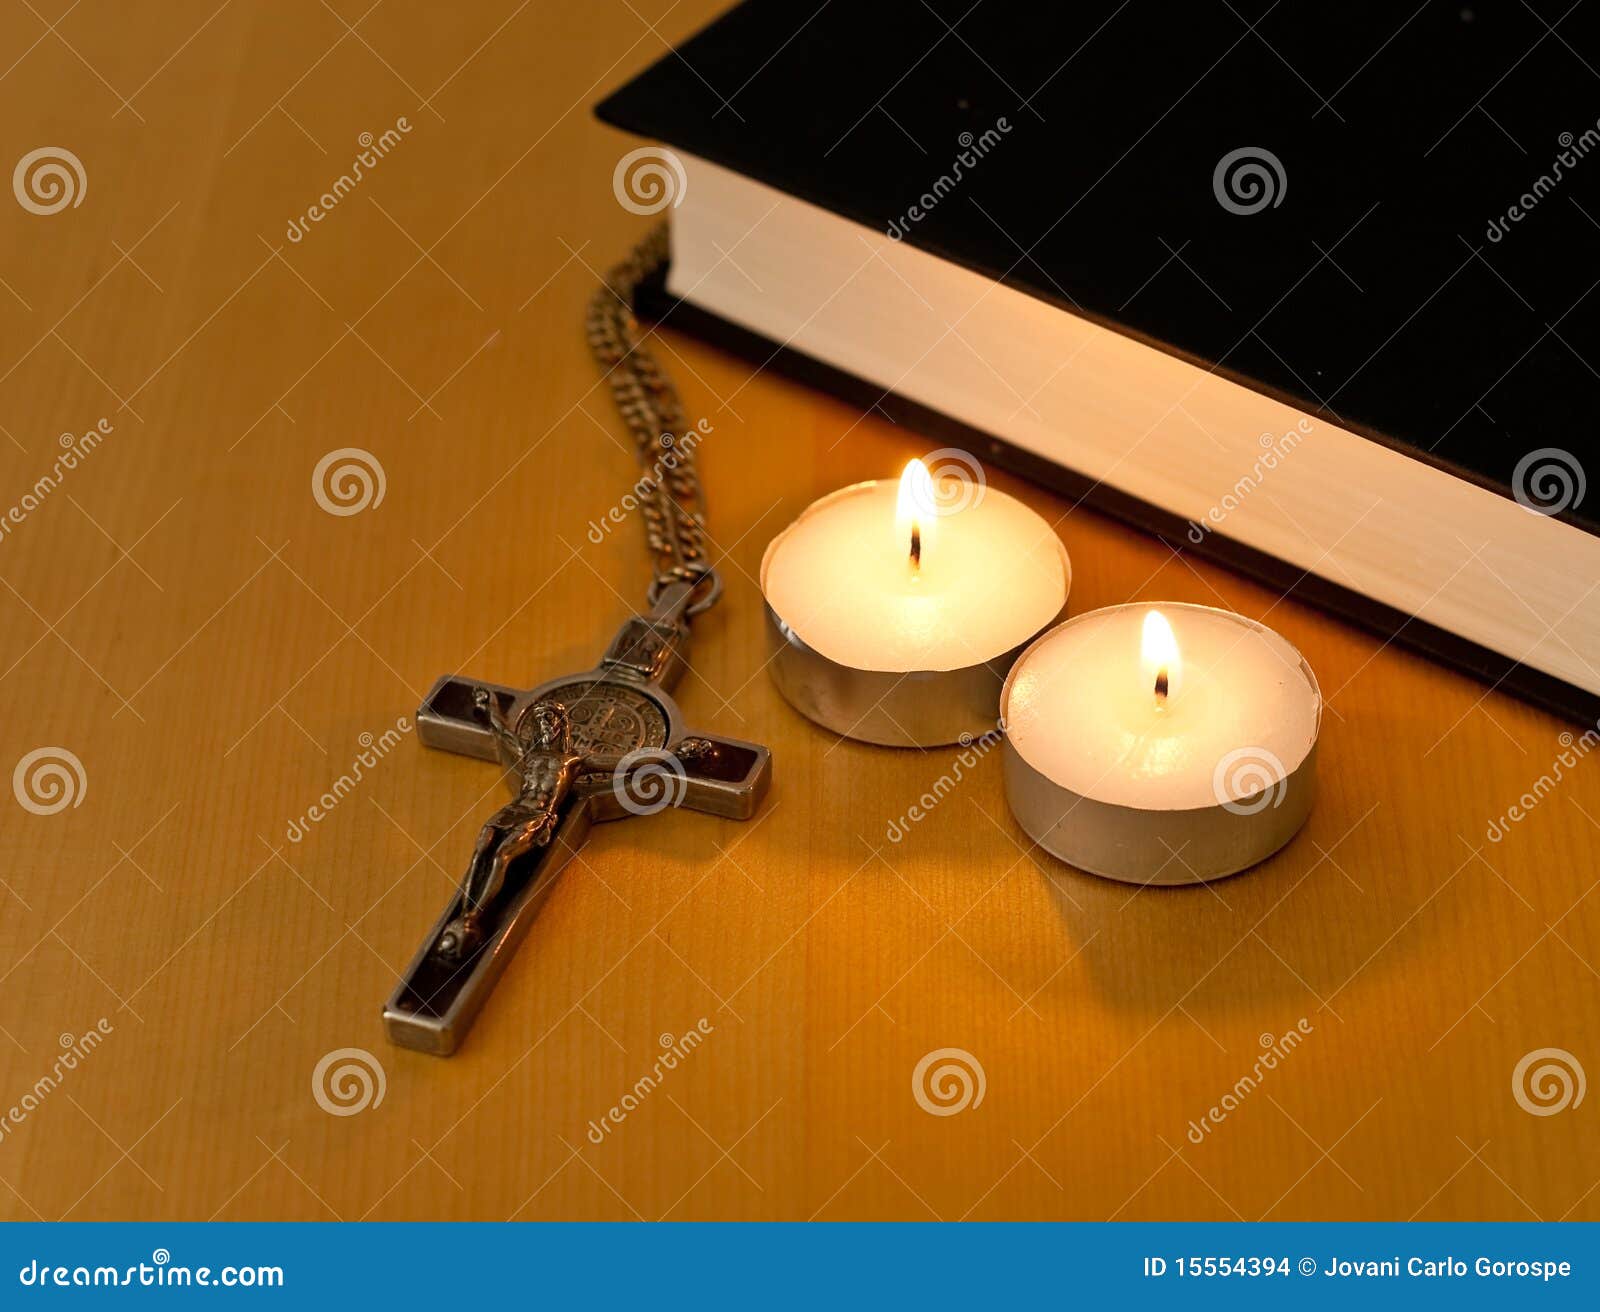 Religious Practice Stock Images - Image: 15554394